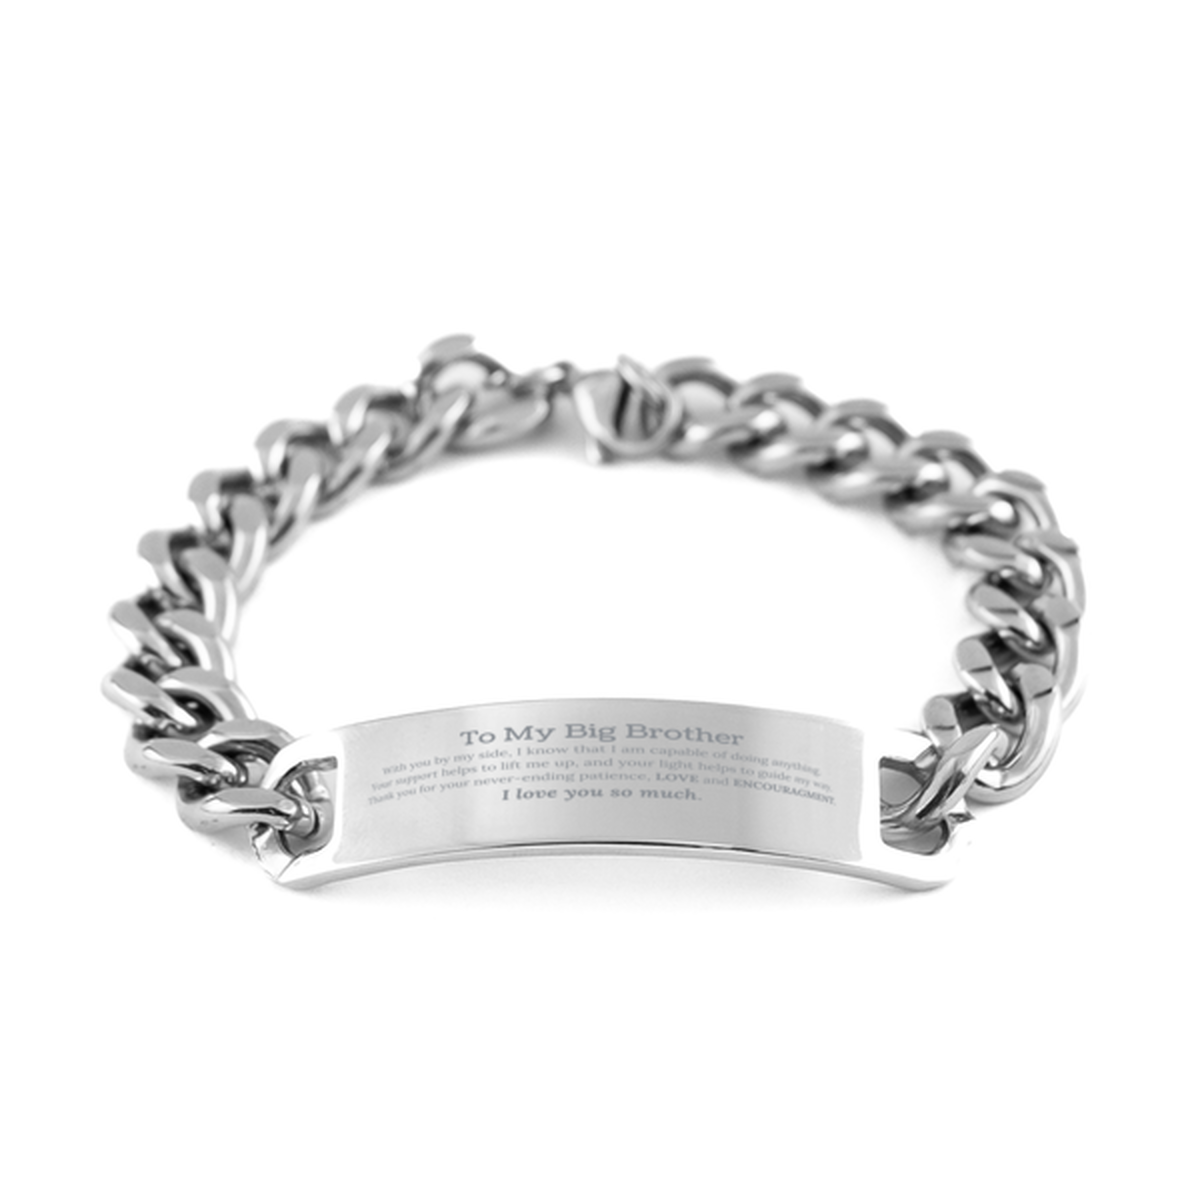 Appreciation Big Brother Cuban Chain Stainless Steel Bracelet Gifts, To My Big Brother Birthday Christmas Wedding Keepsake Gifts for Big Brother With you by my side, I know that I am capable of doing anything. I love you so much